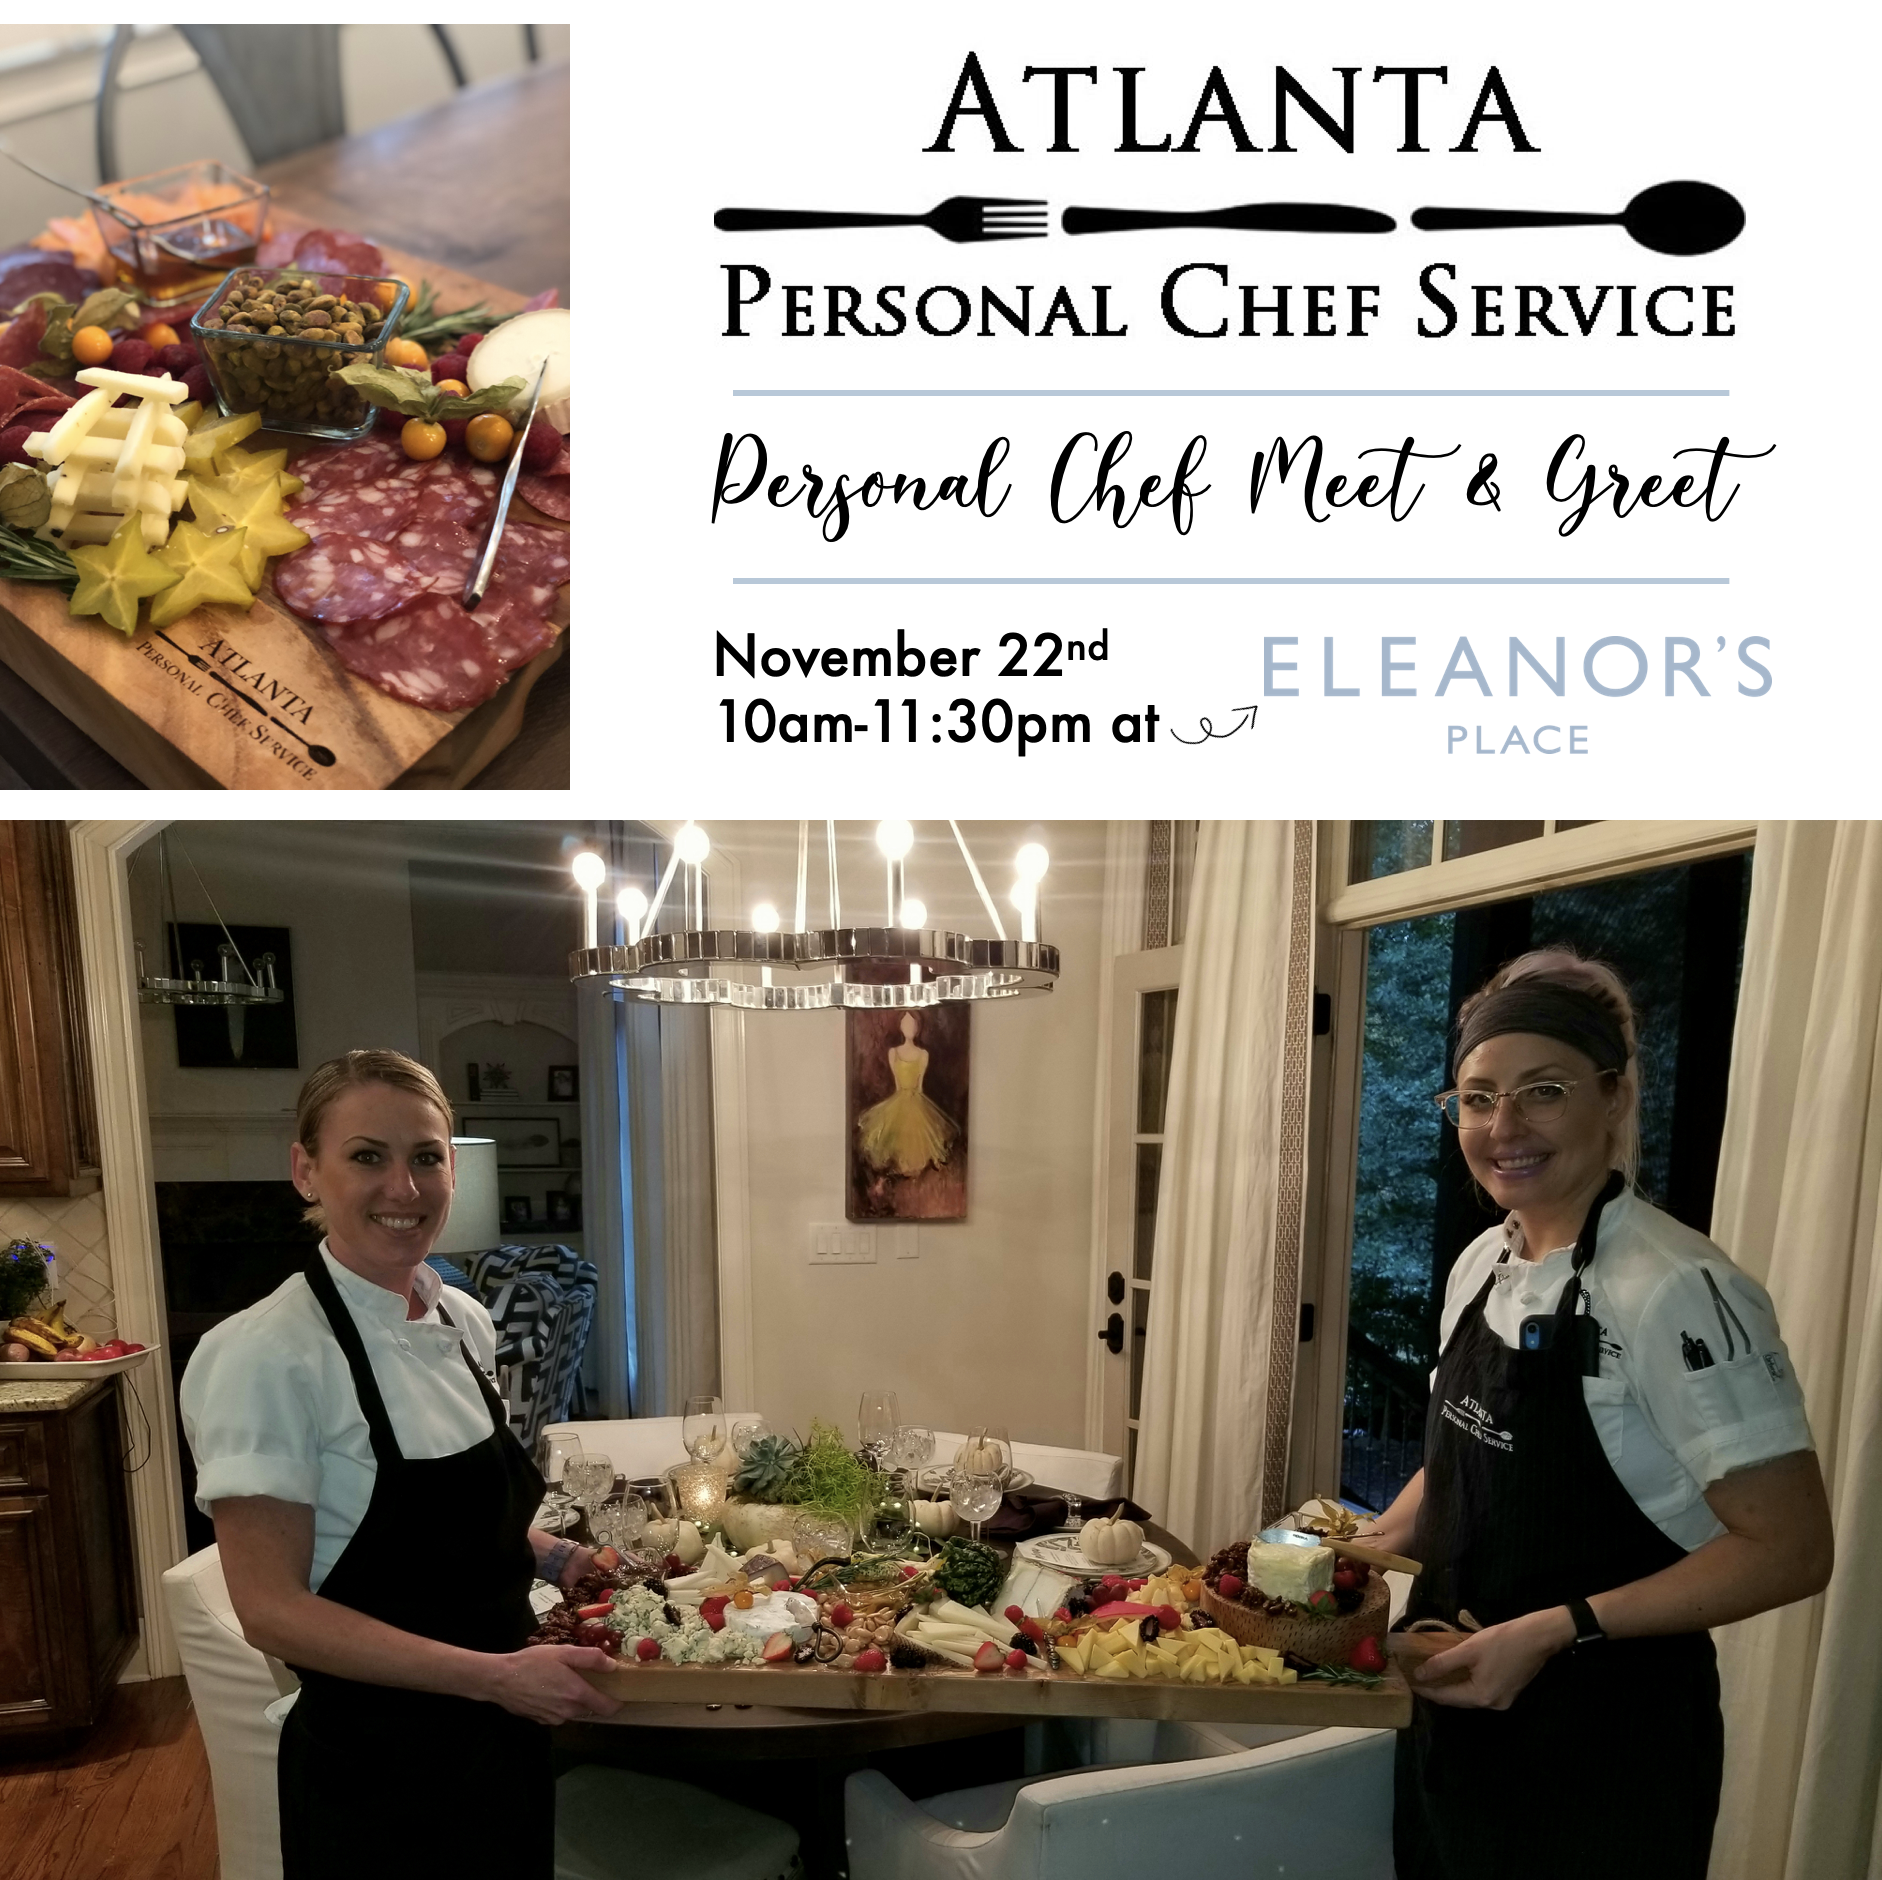 Personal Chef Meet & Greet with Atlanta Personal Chef Service